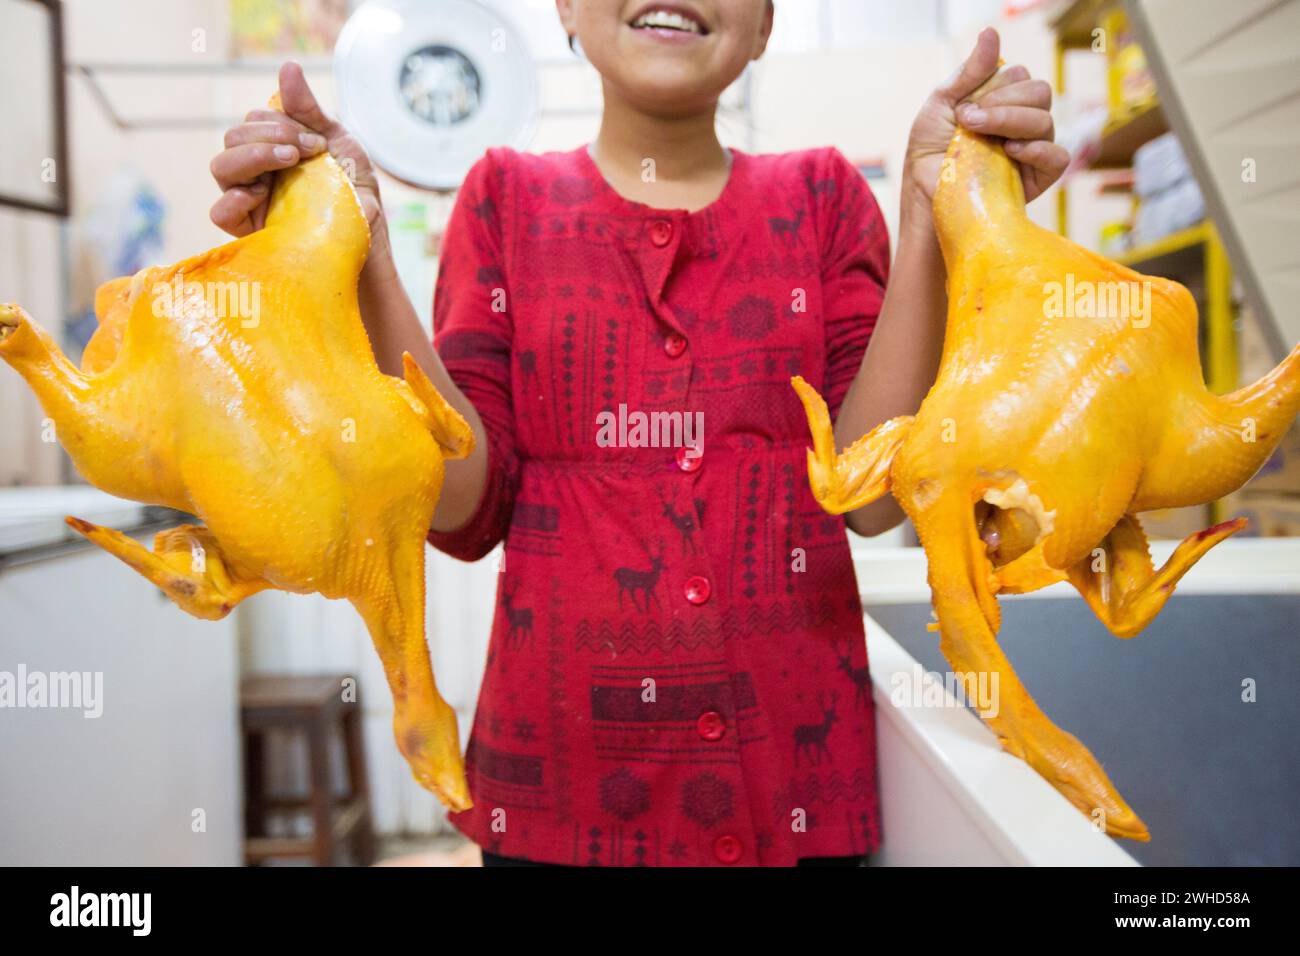 Tupiza, Bolivia - 30th December 2014: Young Asian girl smiling and holding two chickens on sale inside a local shop in Tupiza, Bolivia Stock Photo